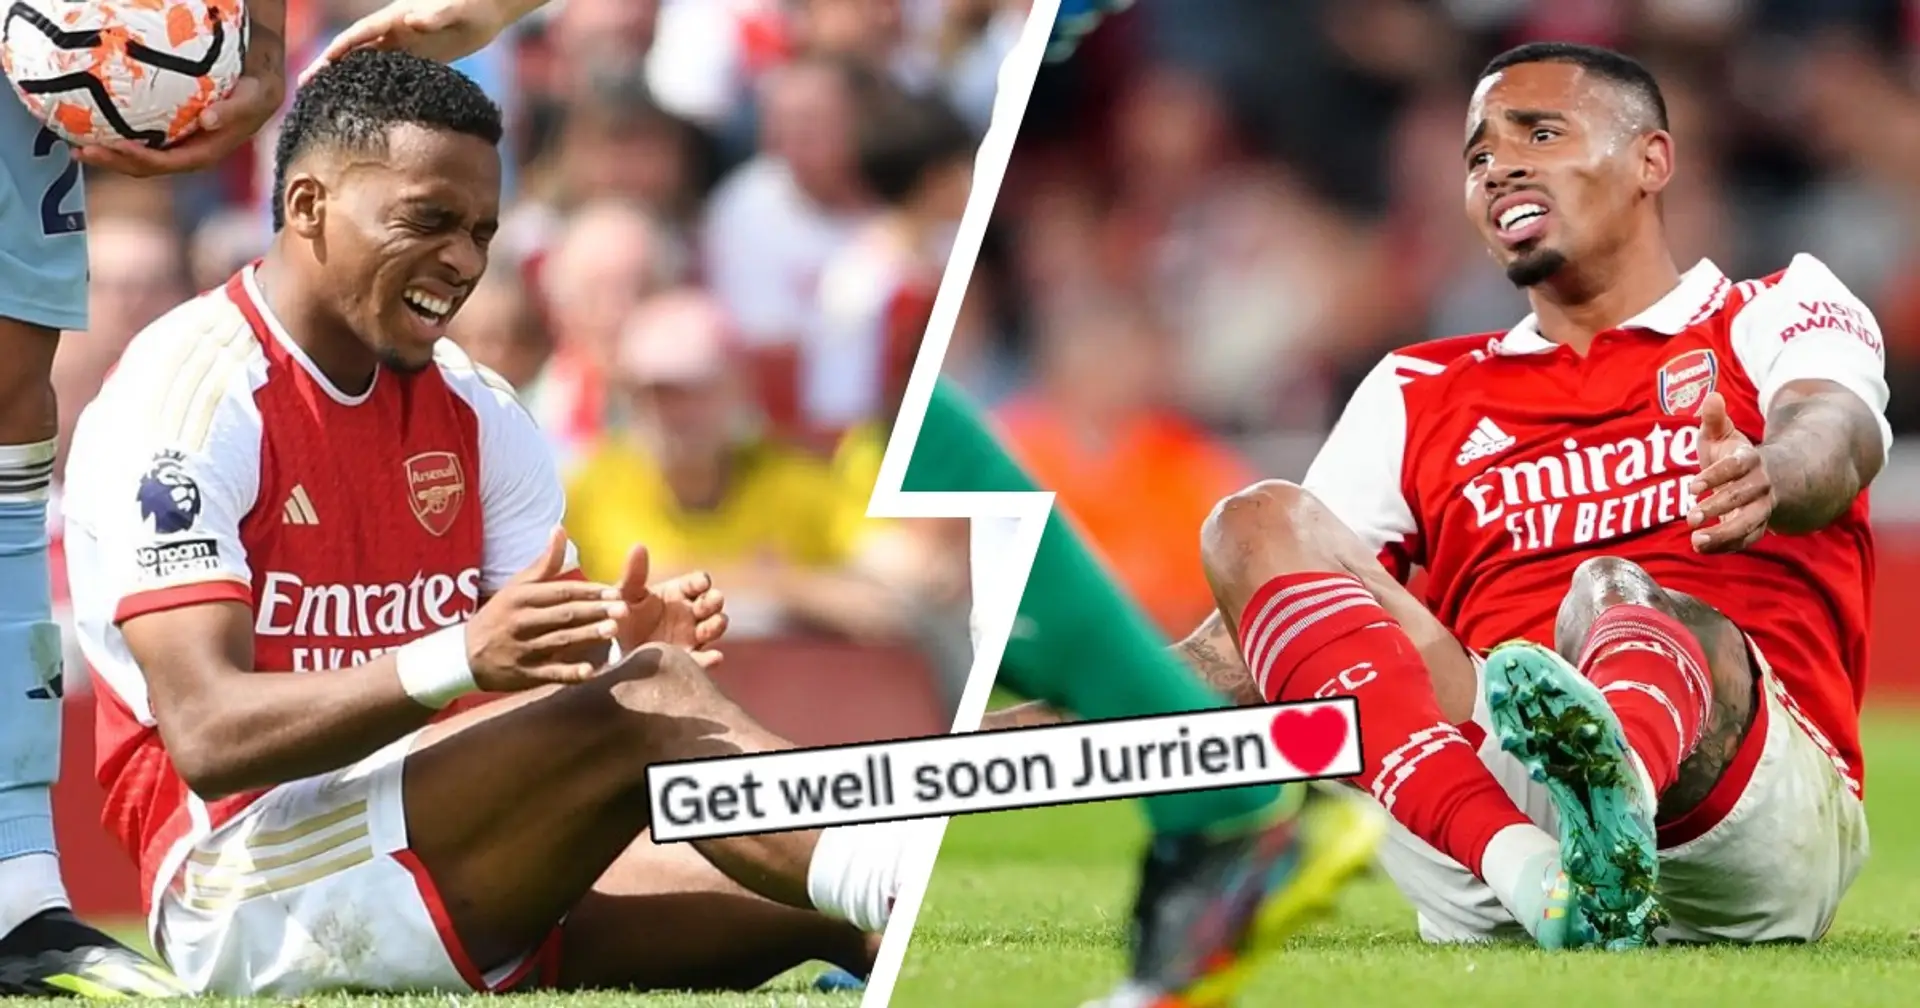 'Someone needs to be fired': Arsenal fans worried over persistent injuries with Timber latest casualty 